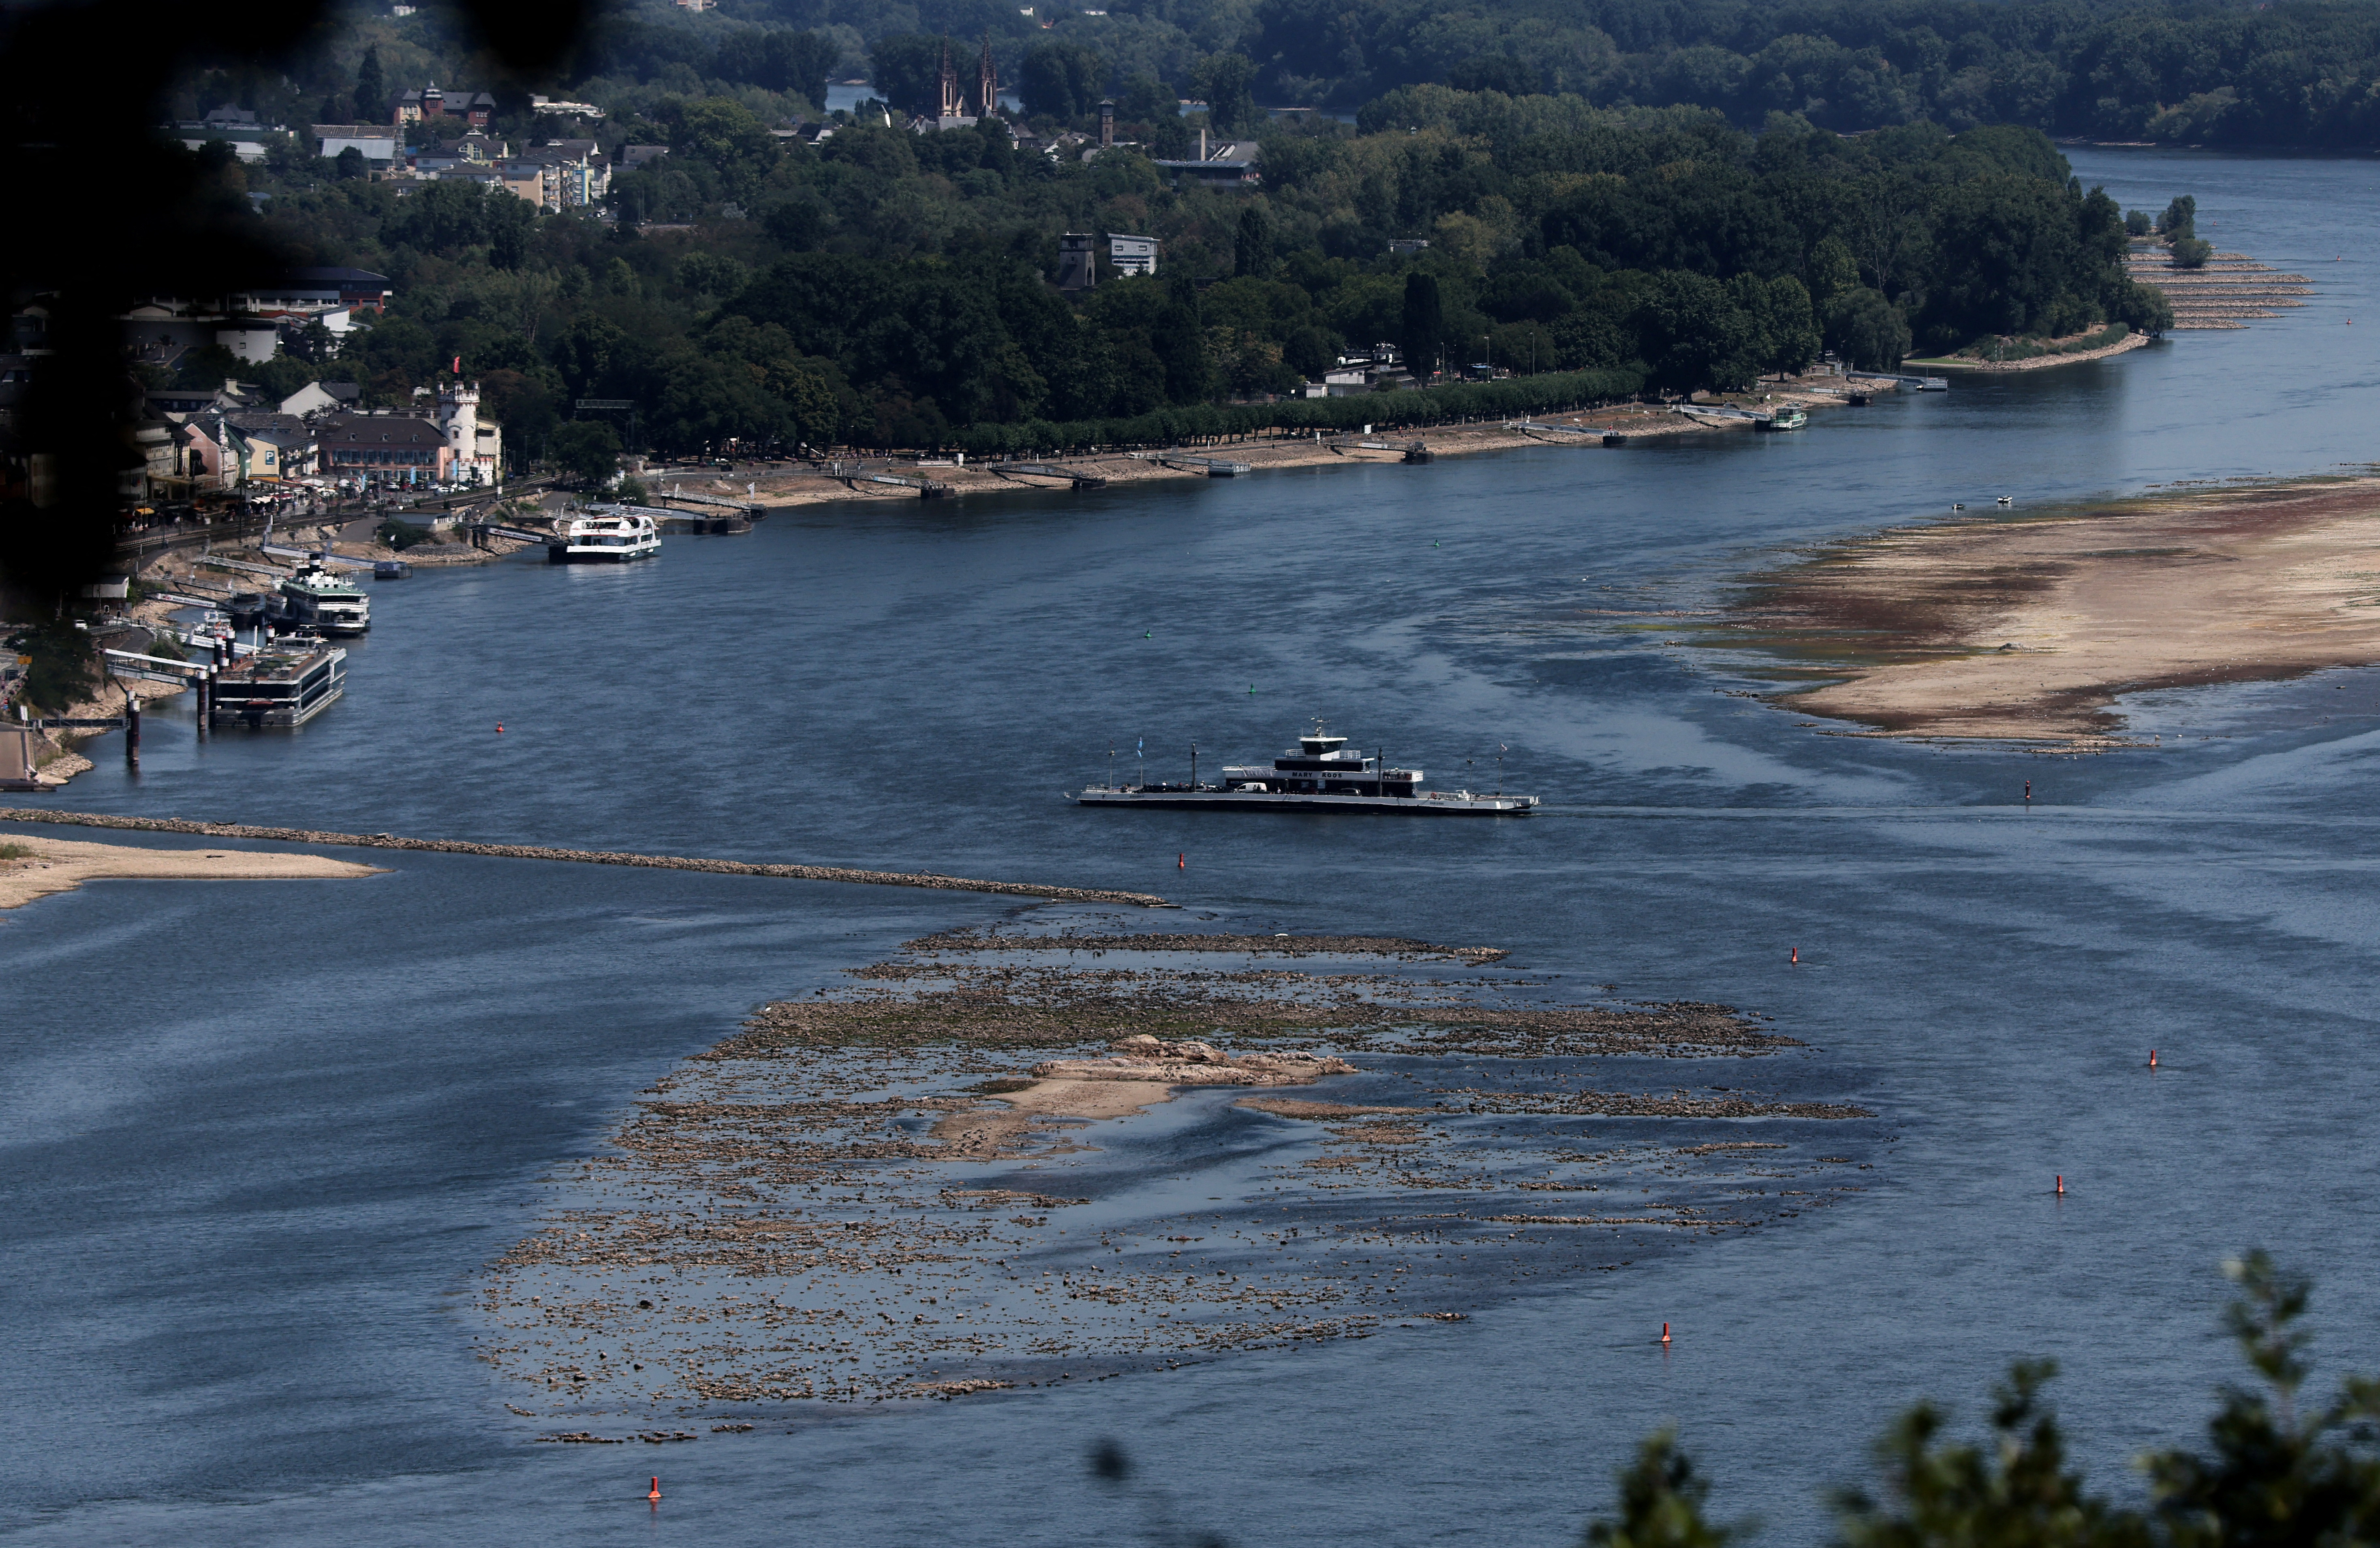 Drought means low water levels in Rhine and a headache for international shipping